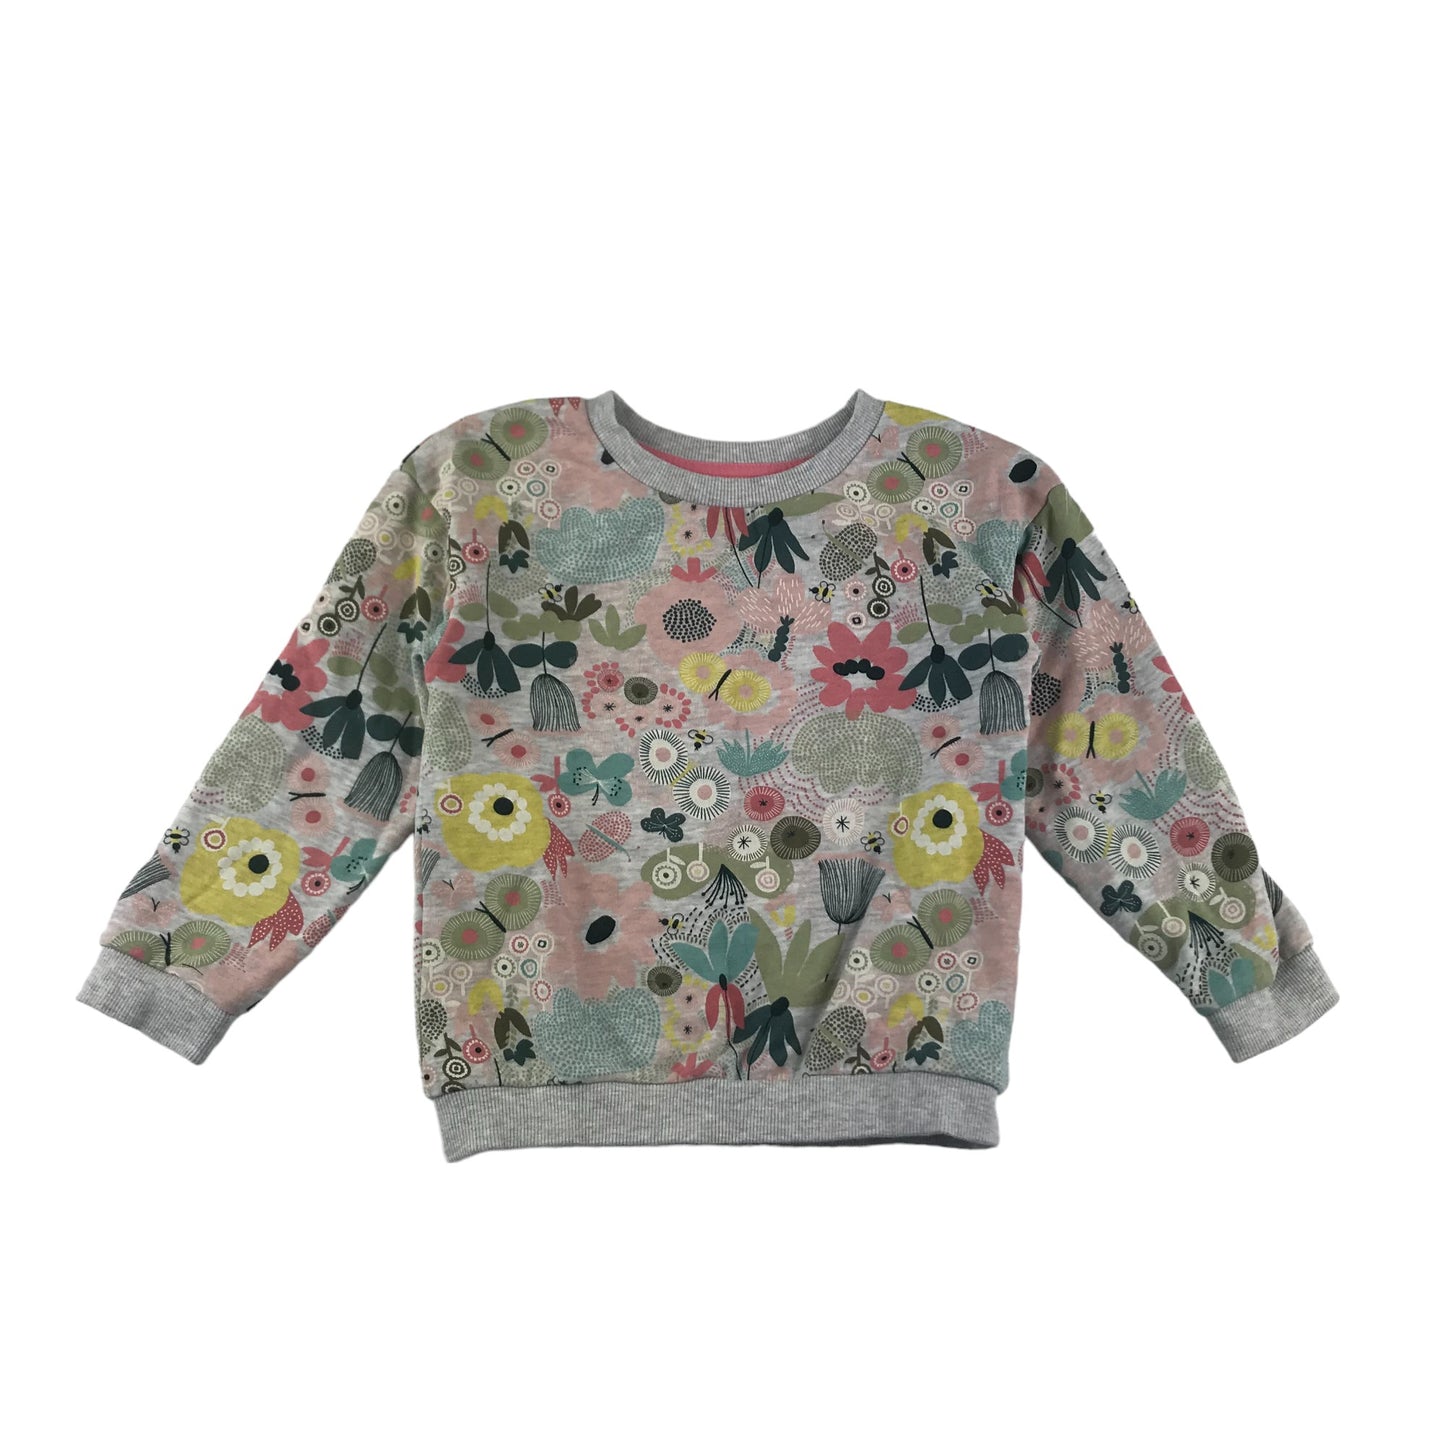 Nutmeg Sweater Age 6 Grey Graphic Floral Print Pattern